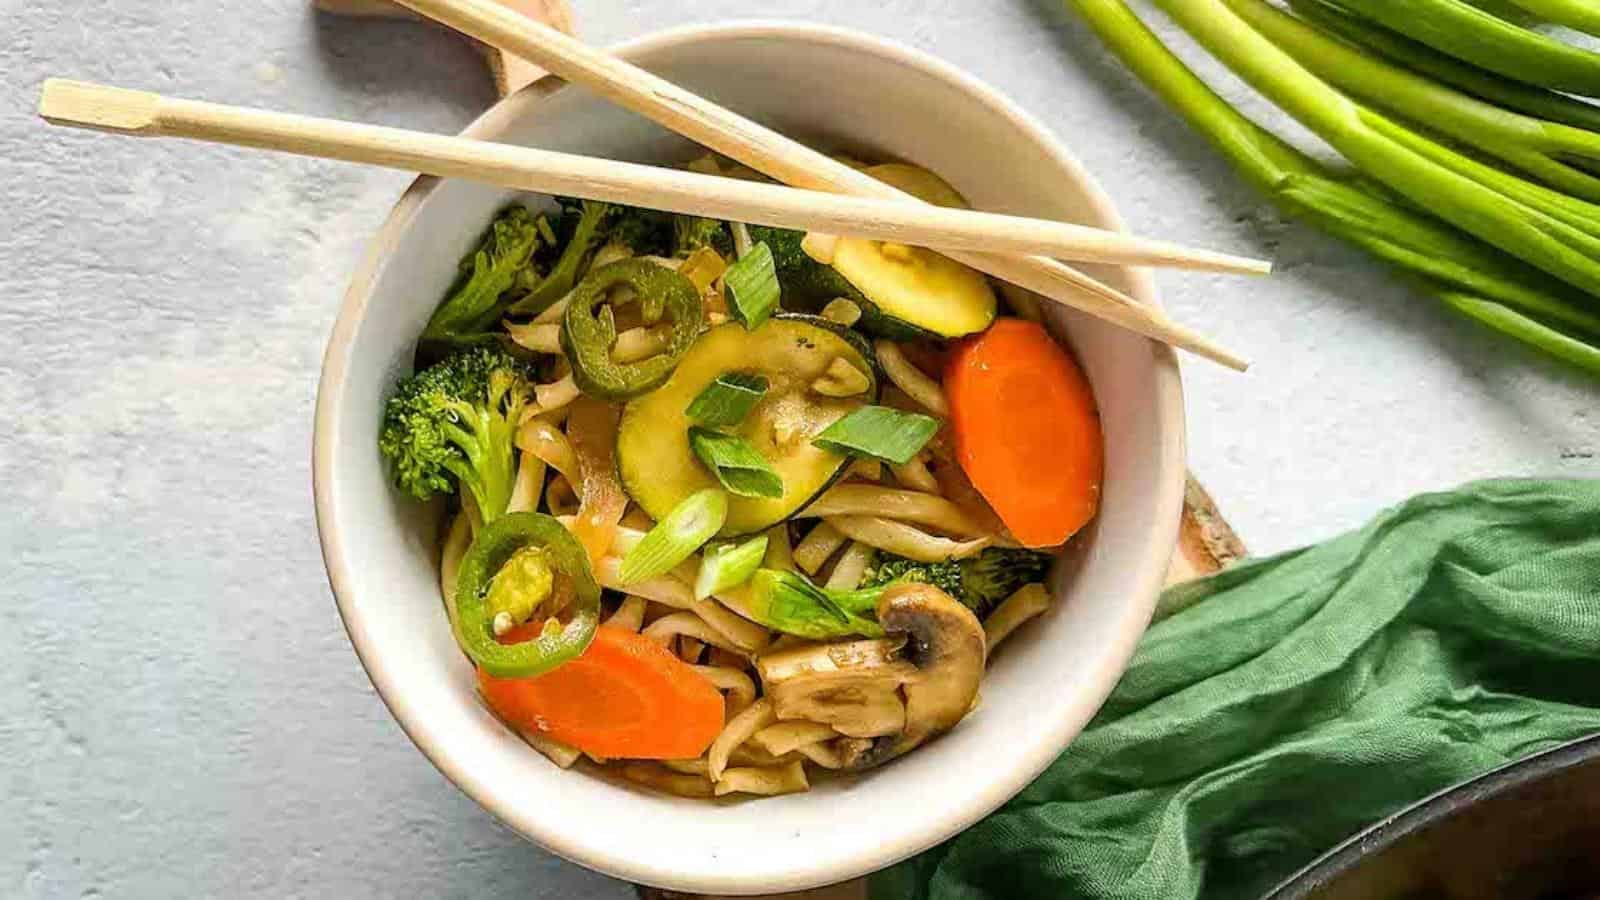 Vegetable yaki udon in a white bowl.